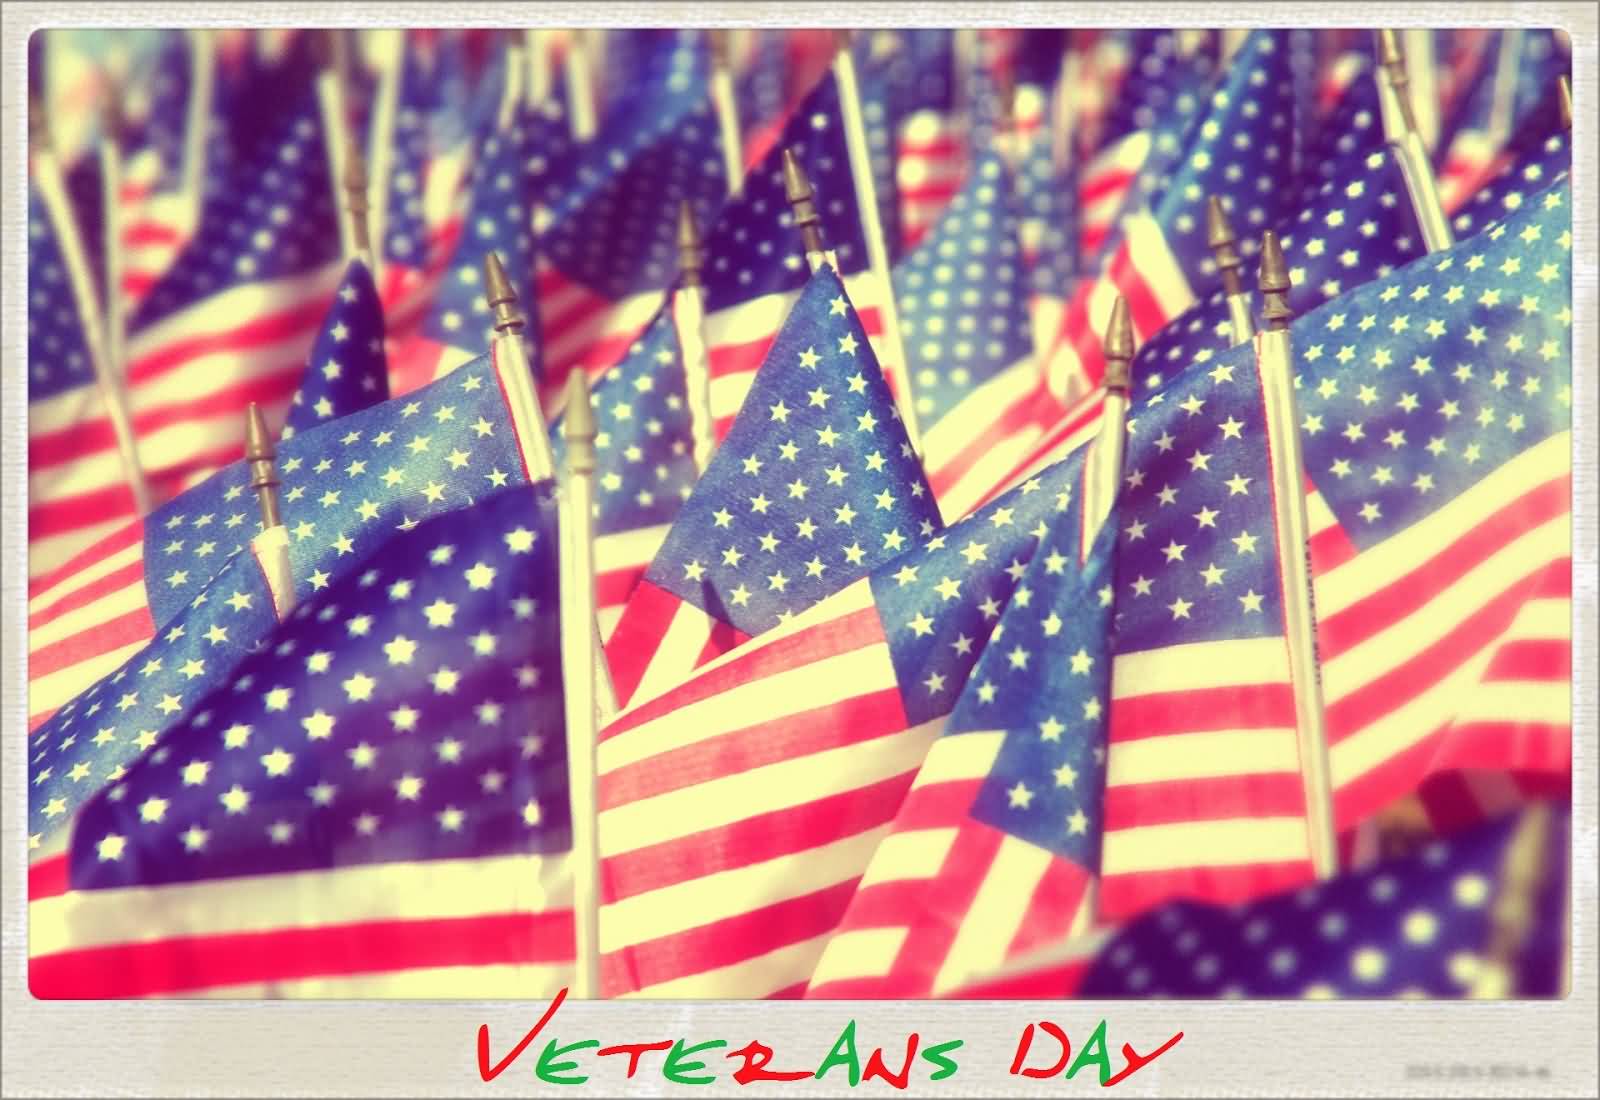 51 Most Beautiful Veterans Day Wish Pictures And Images